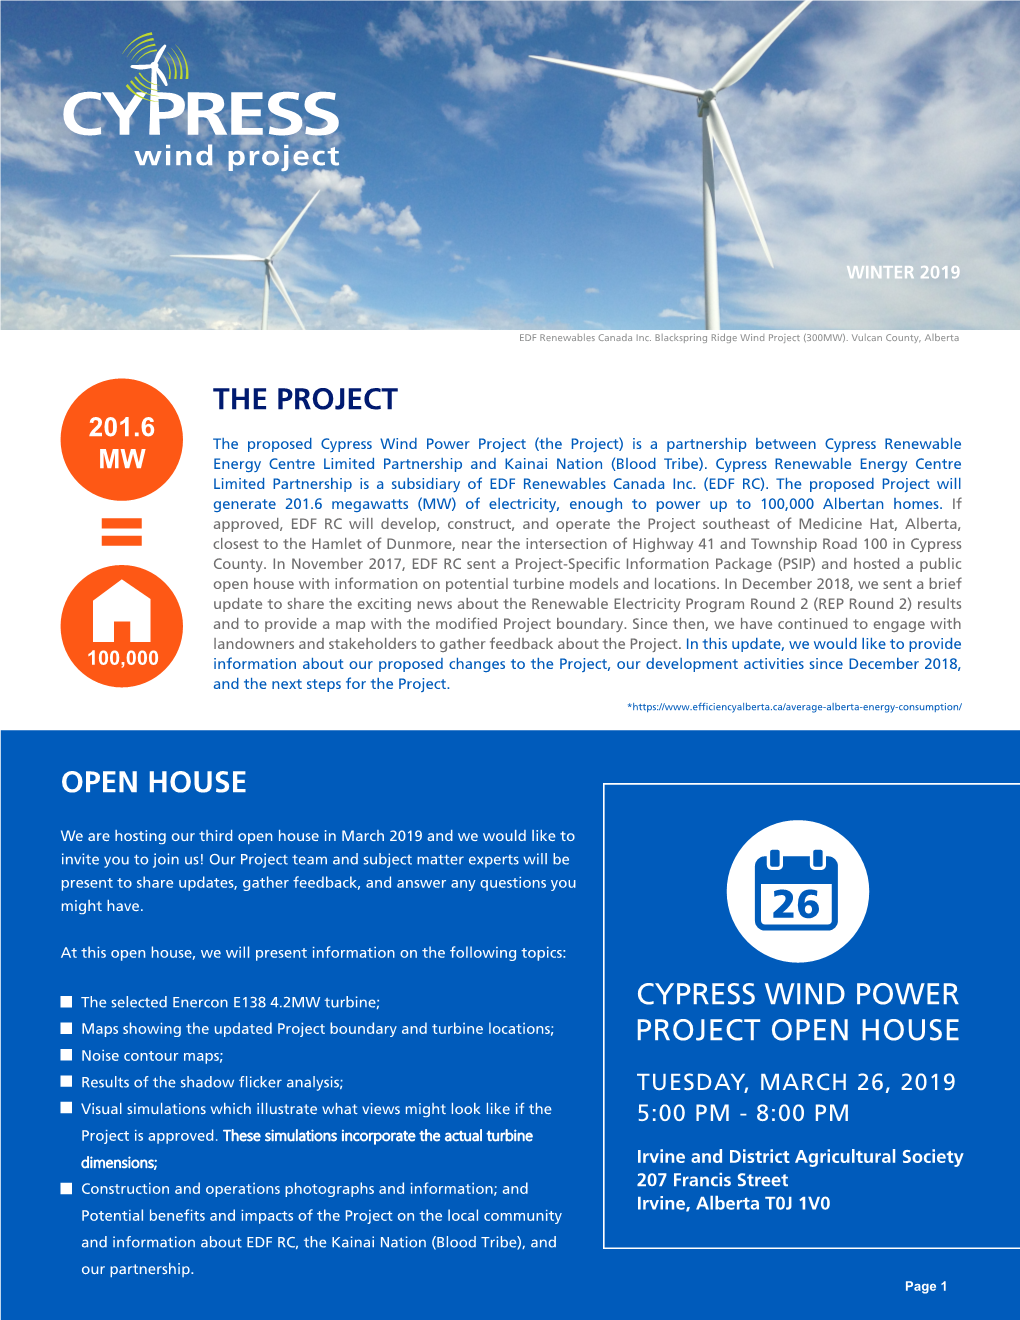 The Project Open House Cypress Wind Power